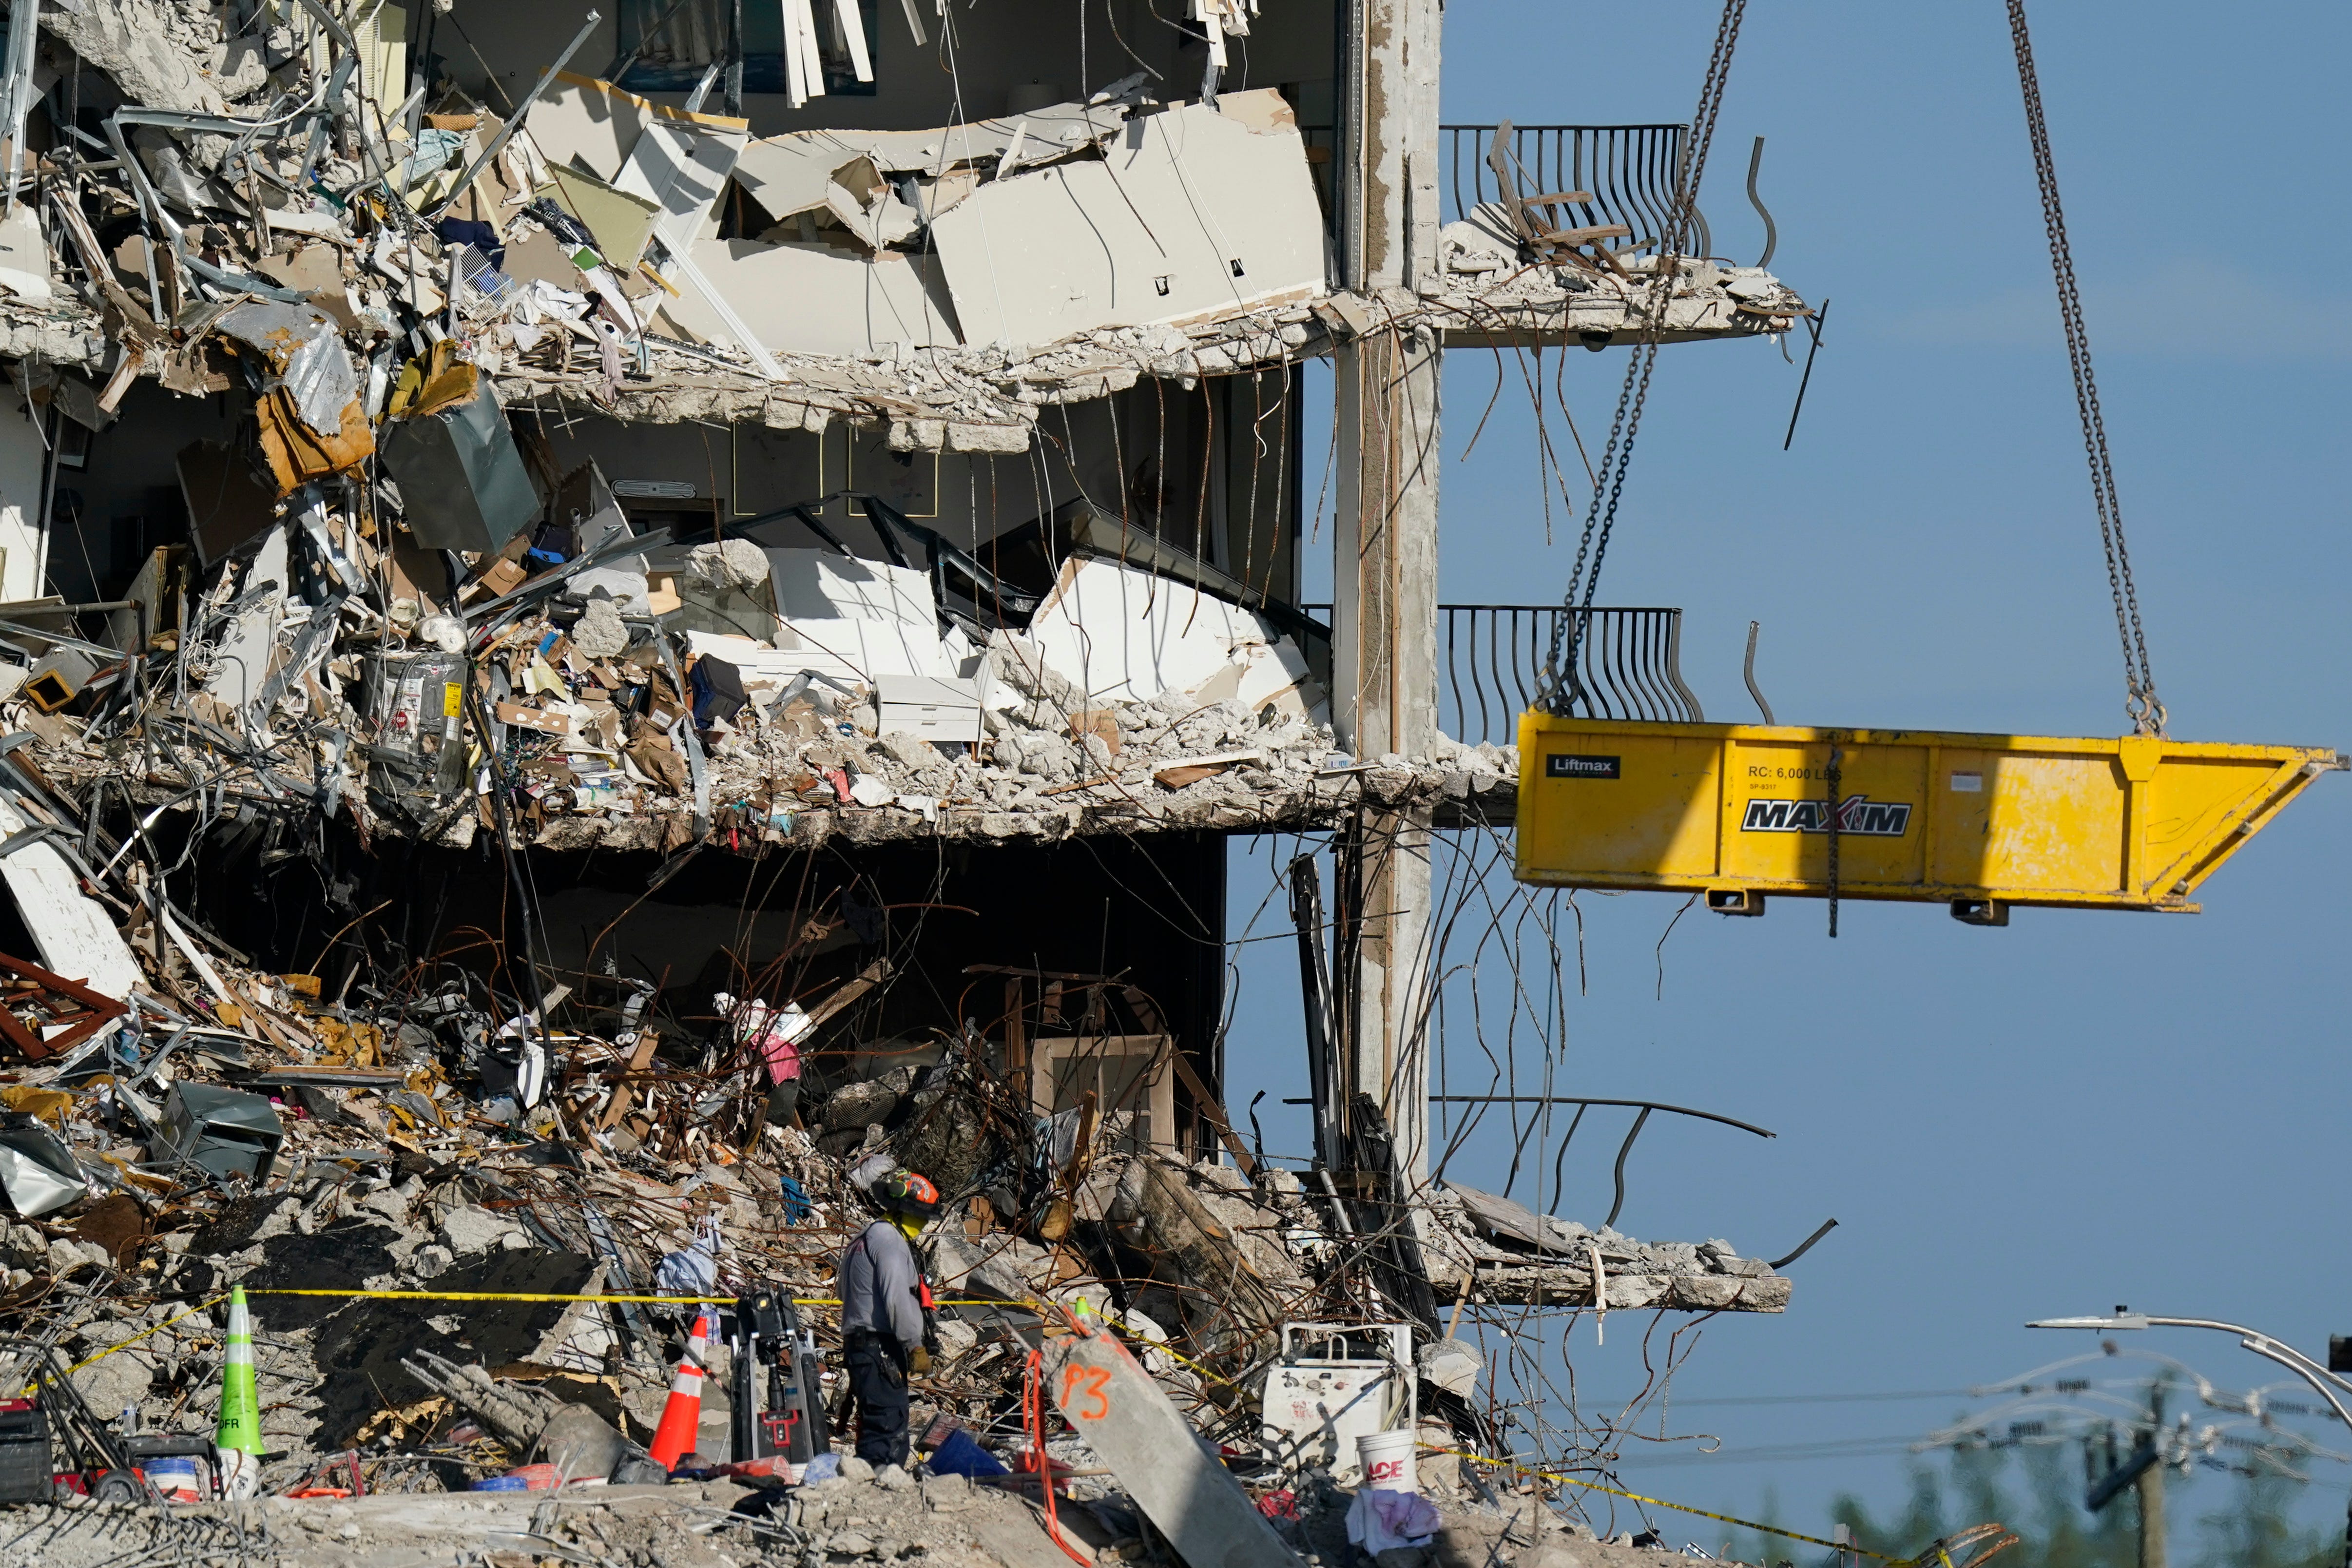 Surfside Collapse 1 Year Later: New Florida Regulations Make Condos Safer, But At What Cost?